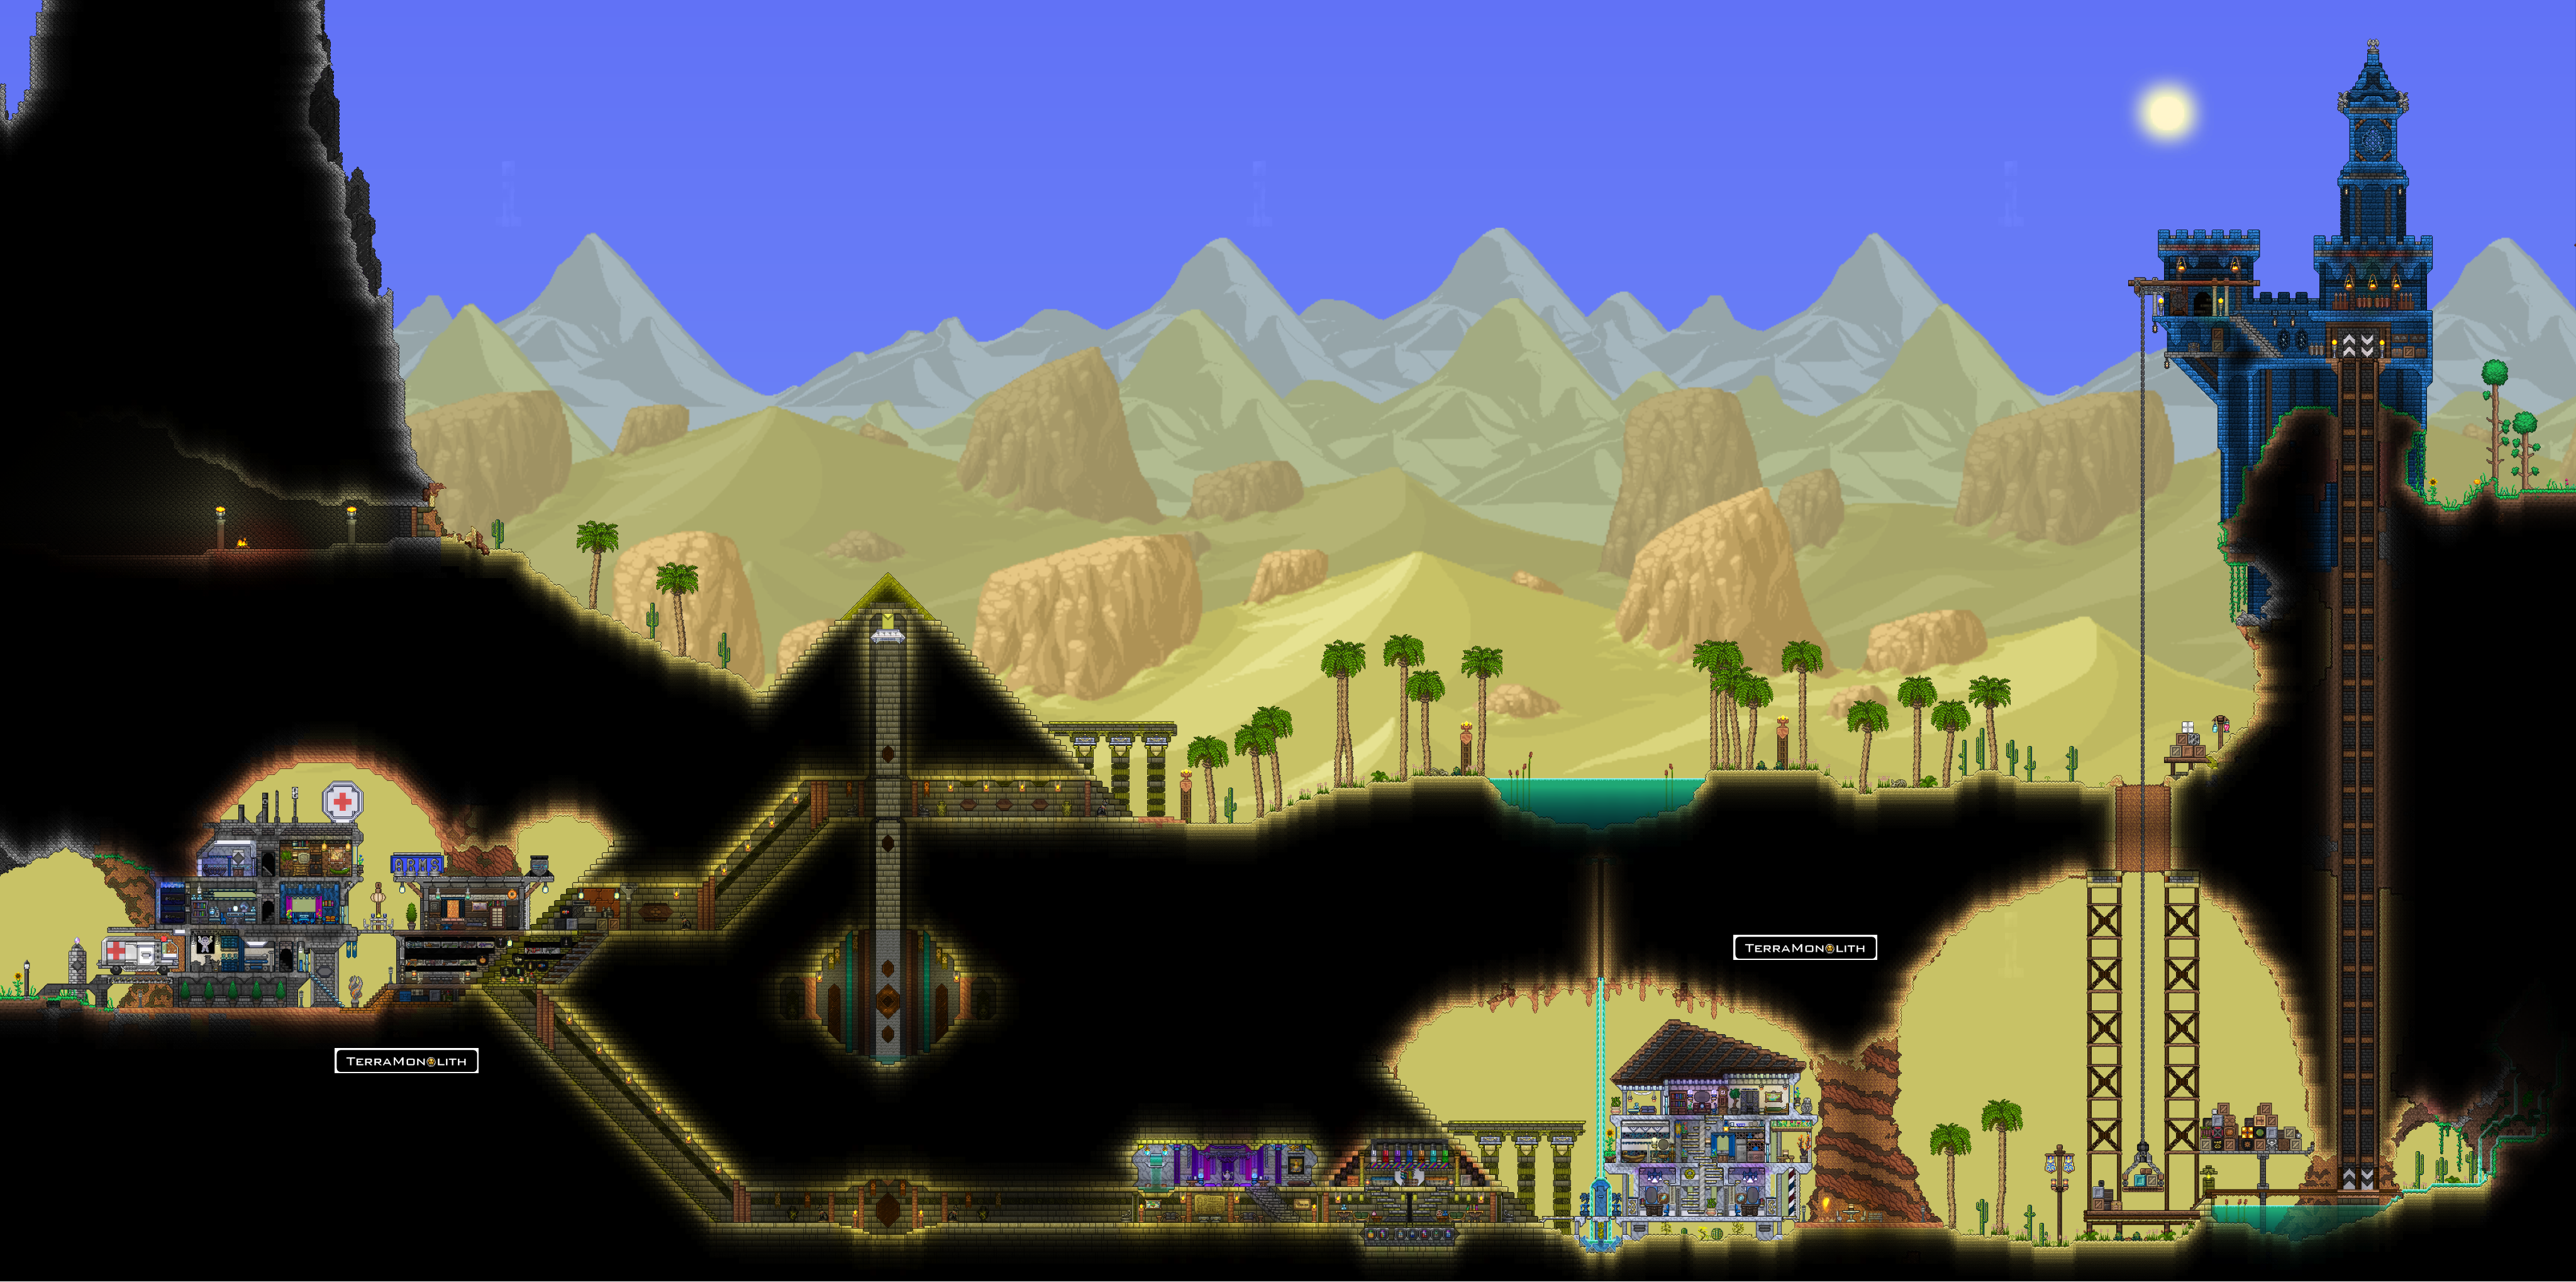 05DesertBiome.png